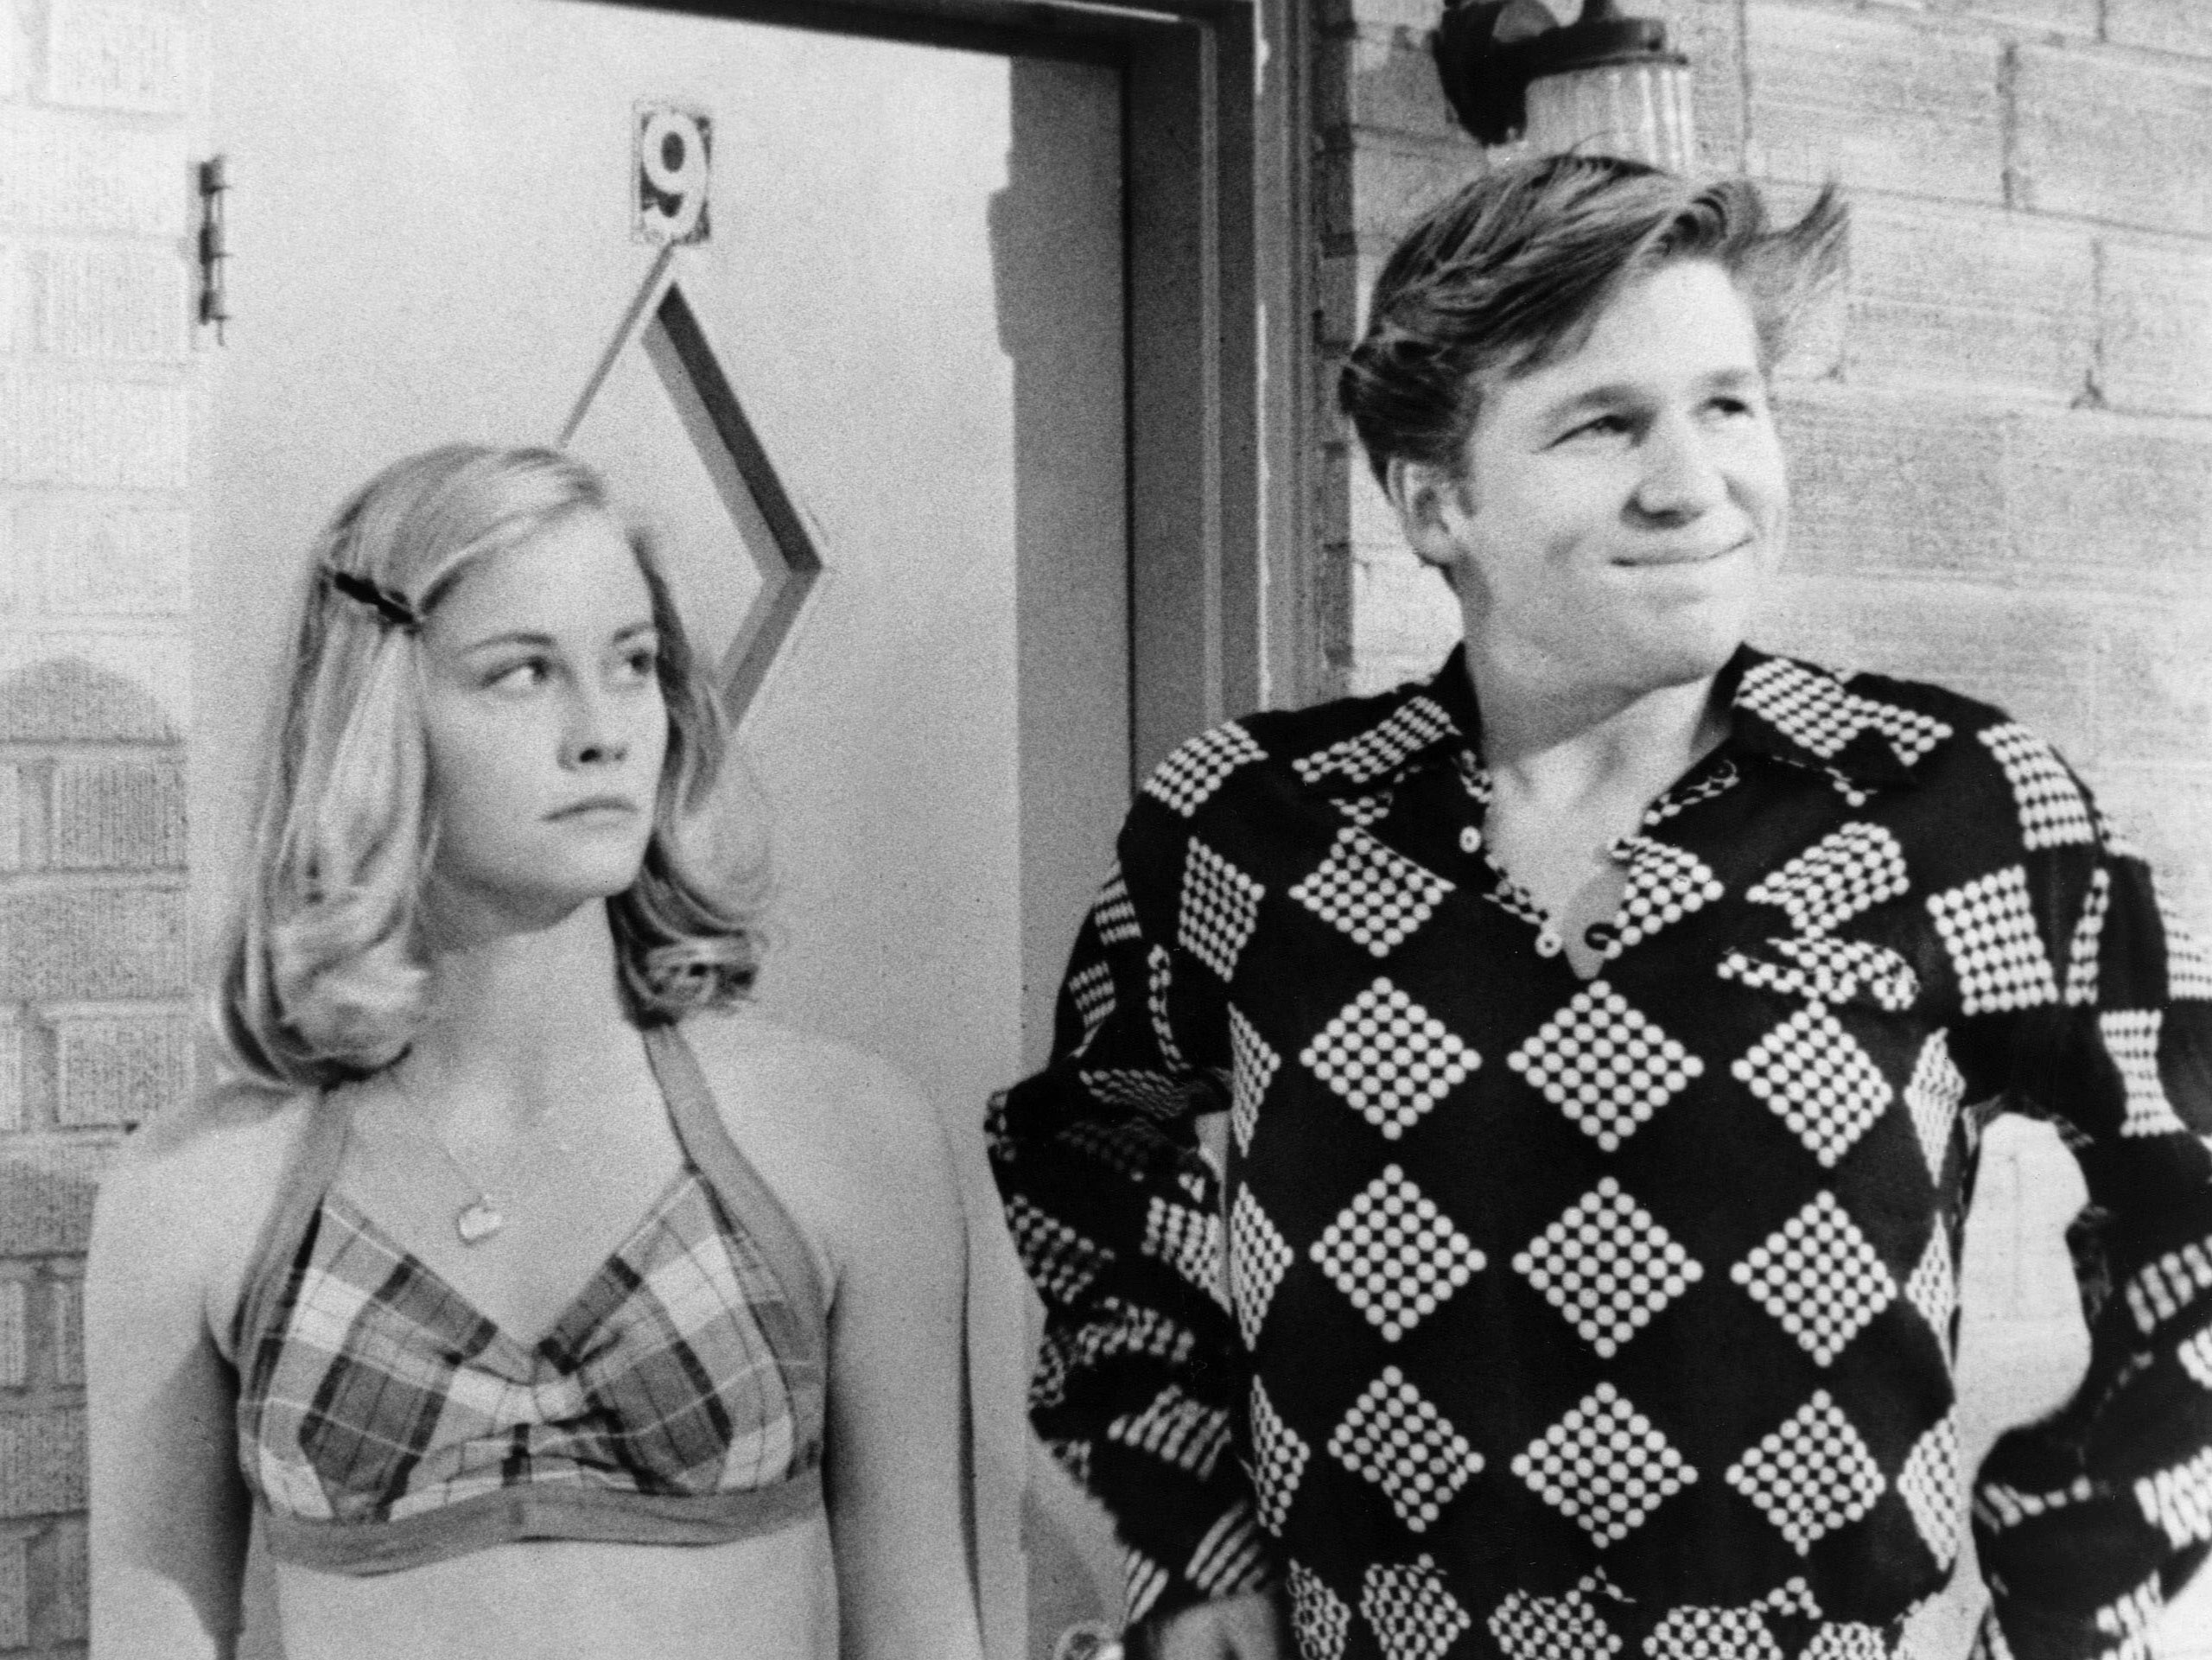 Cybill Shepherd and Bridges in Peter Bogdanovich’s ‘The Last Picture Show’